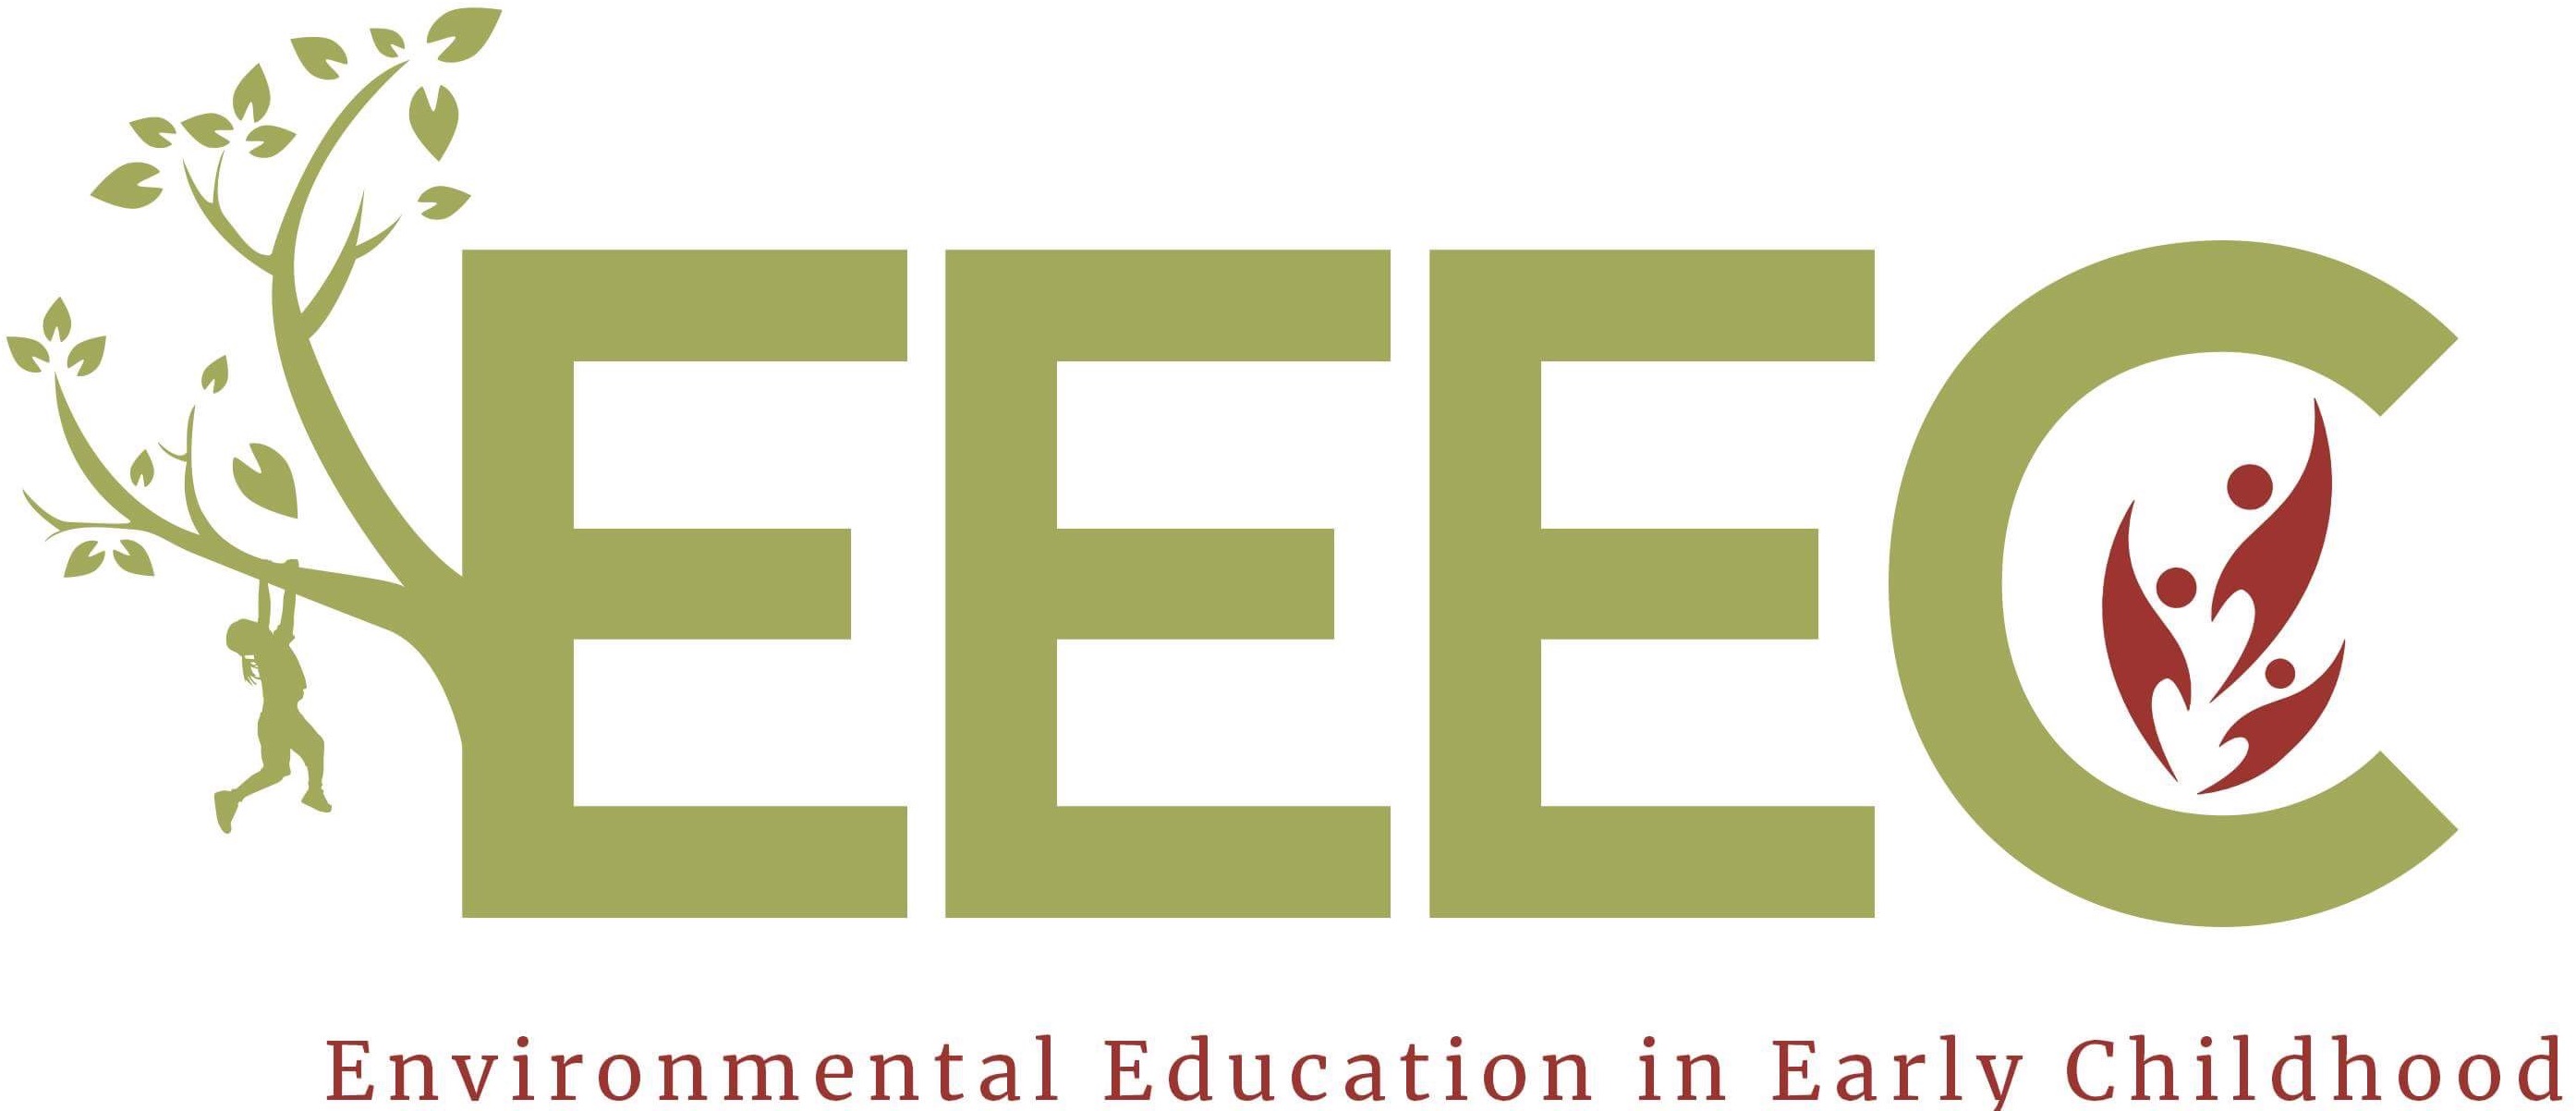 Environmental Education in Early Childhood